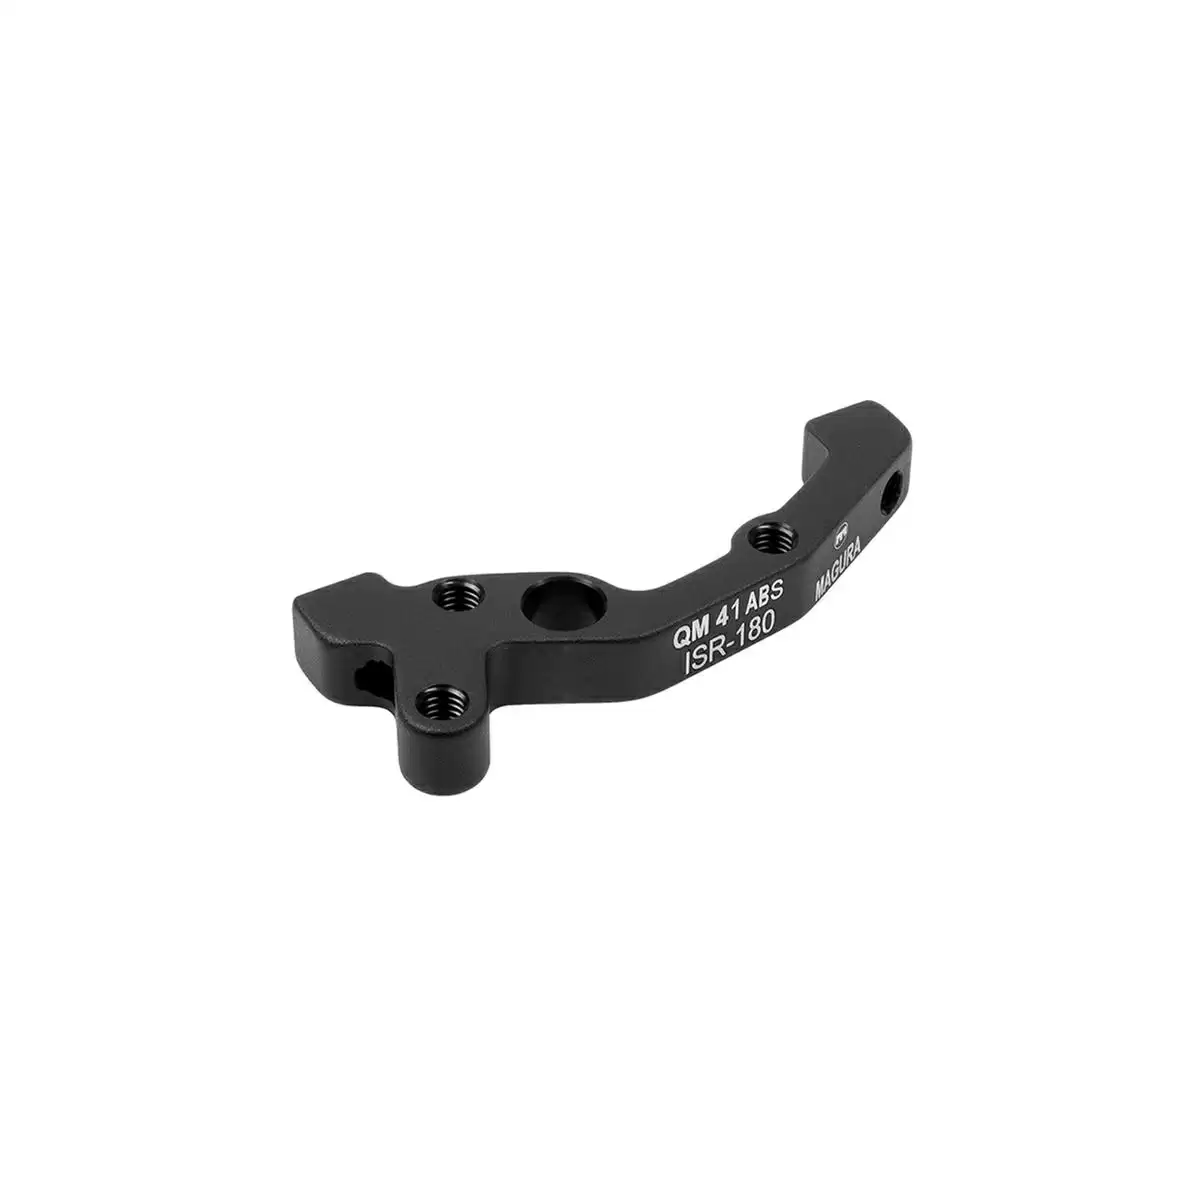 Rear Disc Brake Adapter QM41 ABS IS-PM 180mm - image